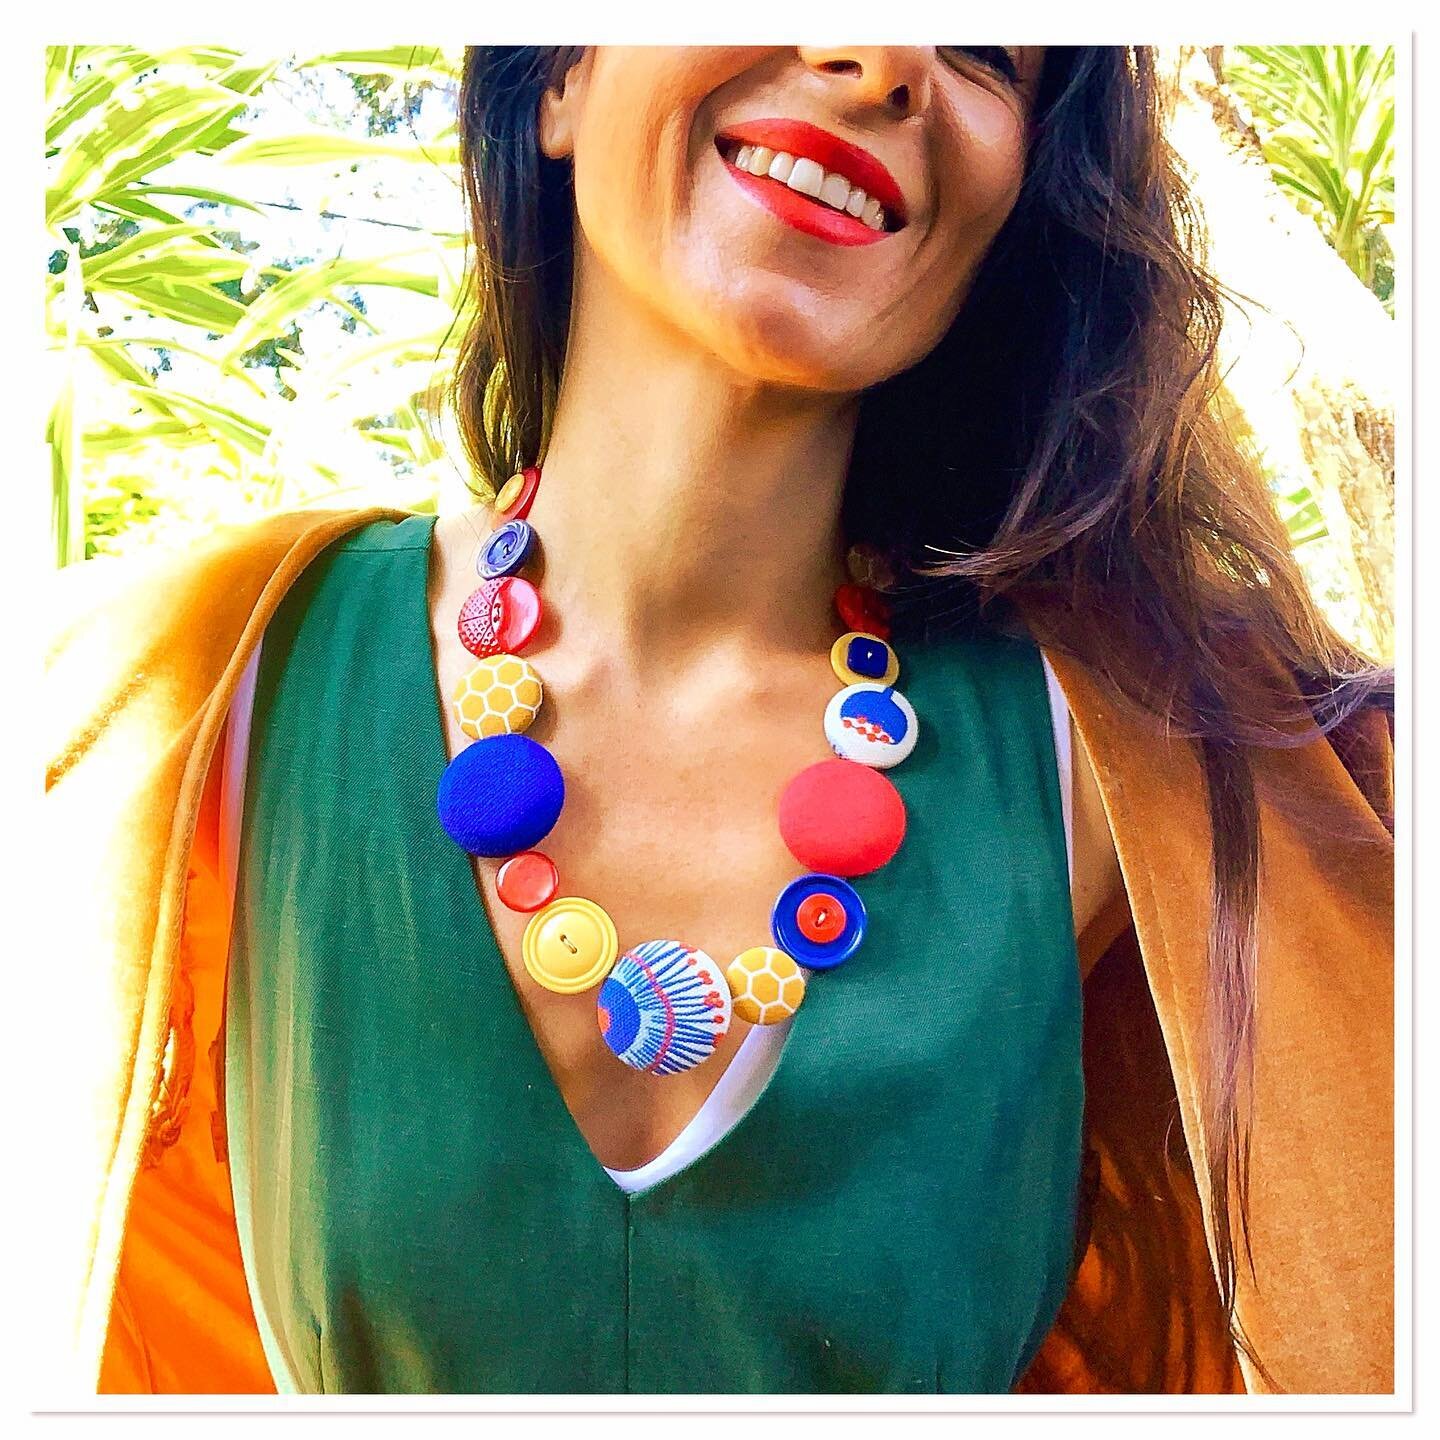 Ladies! Don&rsquo;t let winter stop colour in your life! ❤️💙💛
Add some colourful character to your outfit with this one of a kind button necklace! 👈🏻 Swipe for matching earrings and close up pics 😍
The neckpiece features a vibrant palette of fie